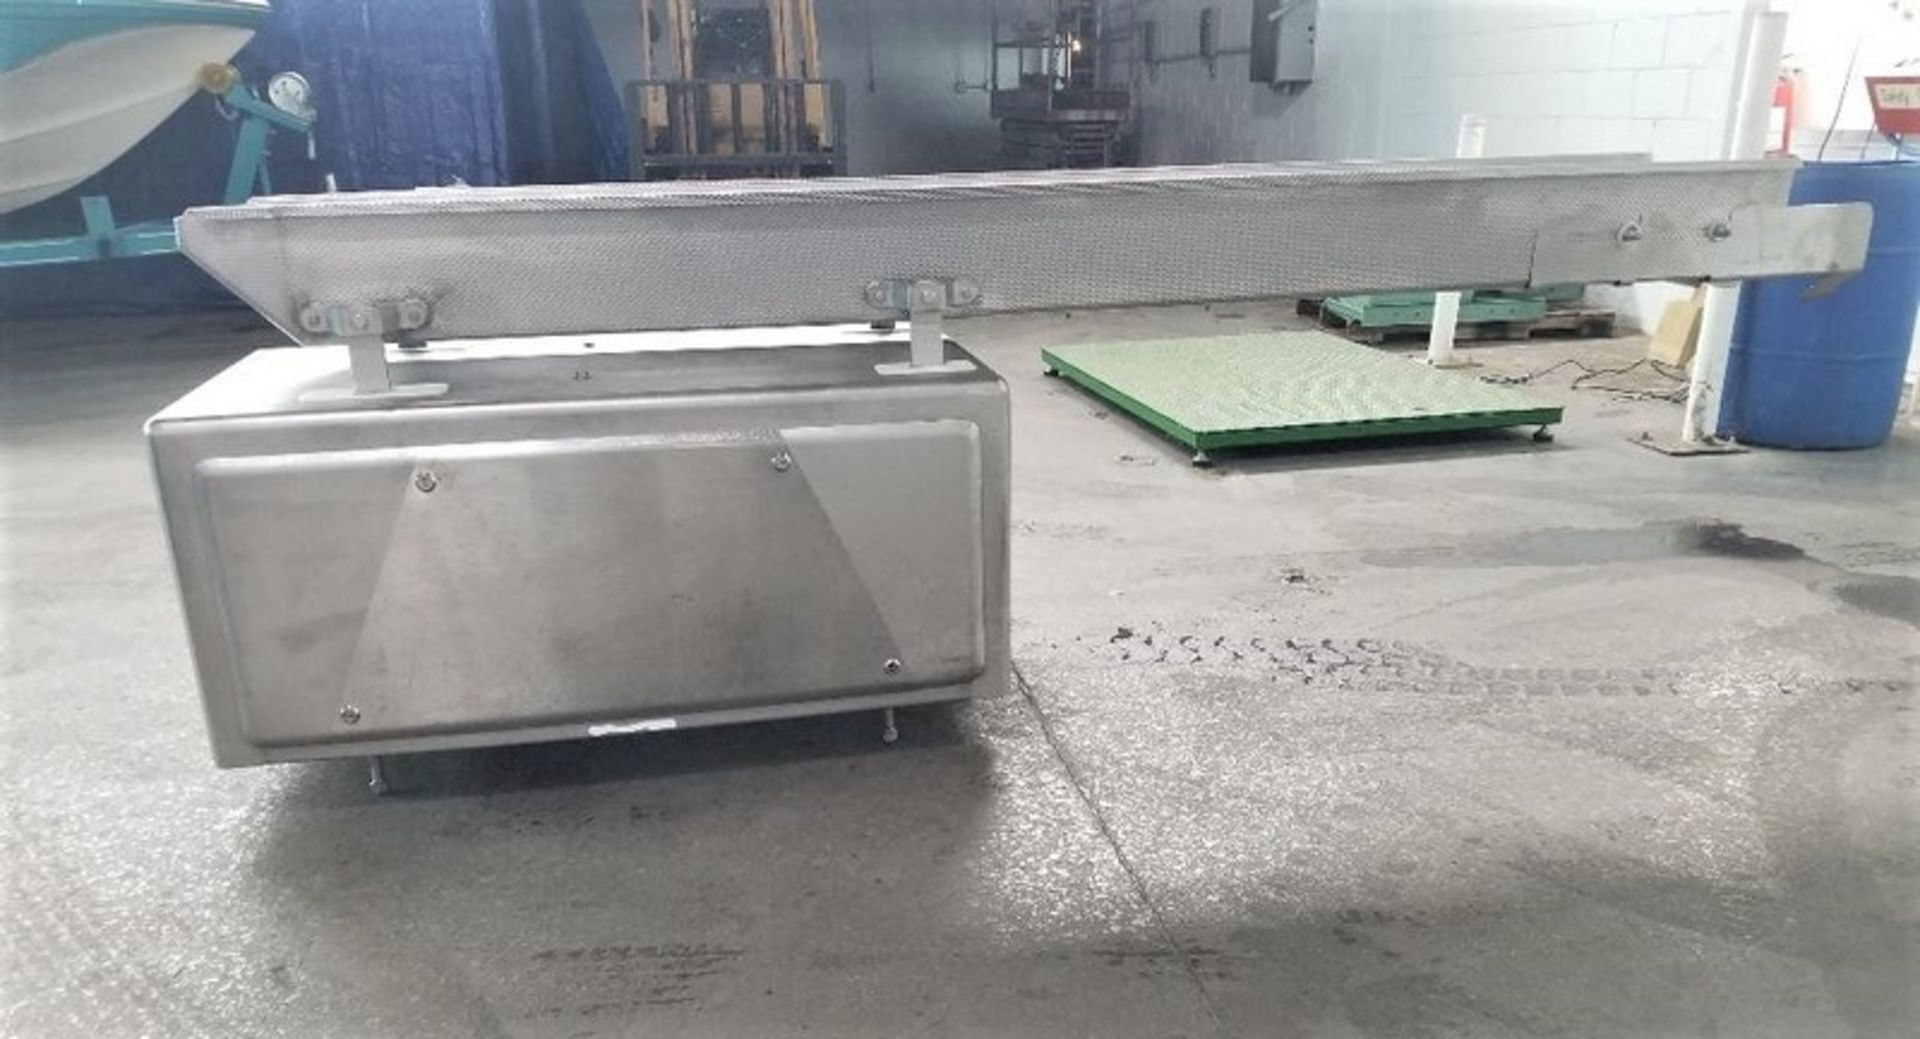 S/S Sanitary Vibratory Scale Feeder, Aprox. 16" W x 112" L. Last used in Food Industry. Unit Removed - Bild 5 aus 10